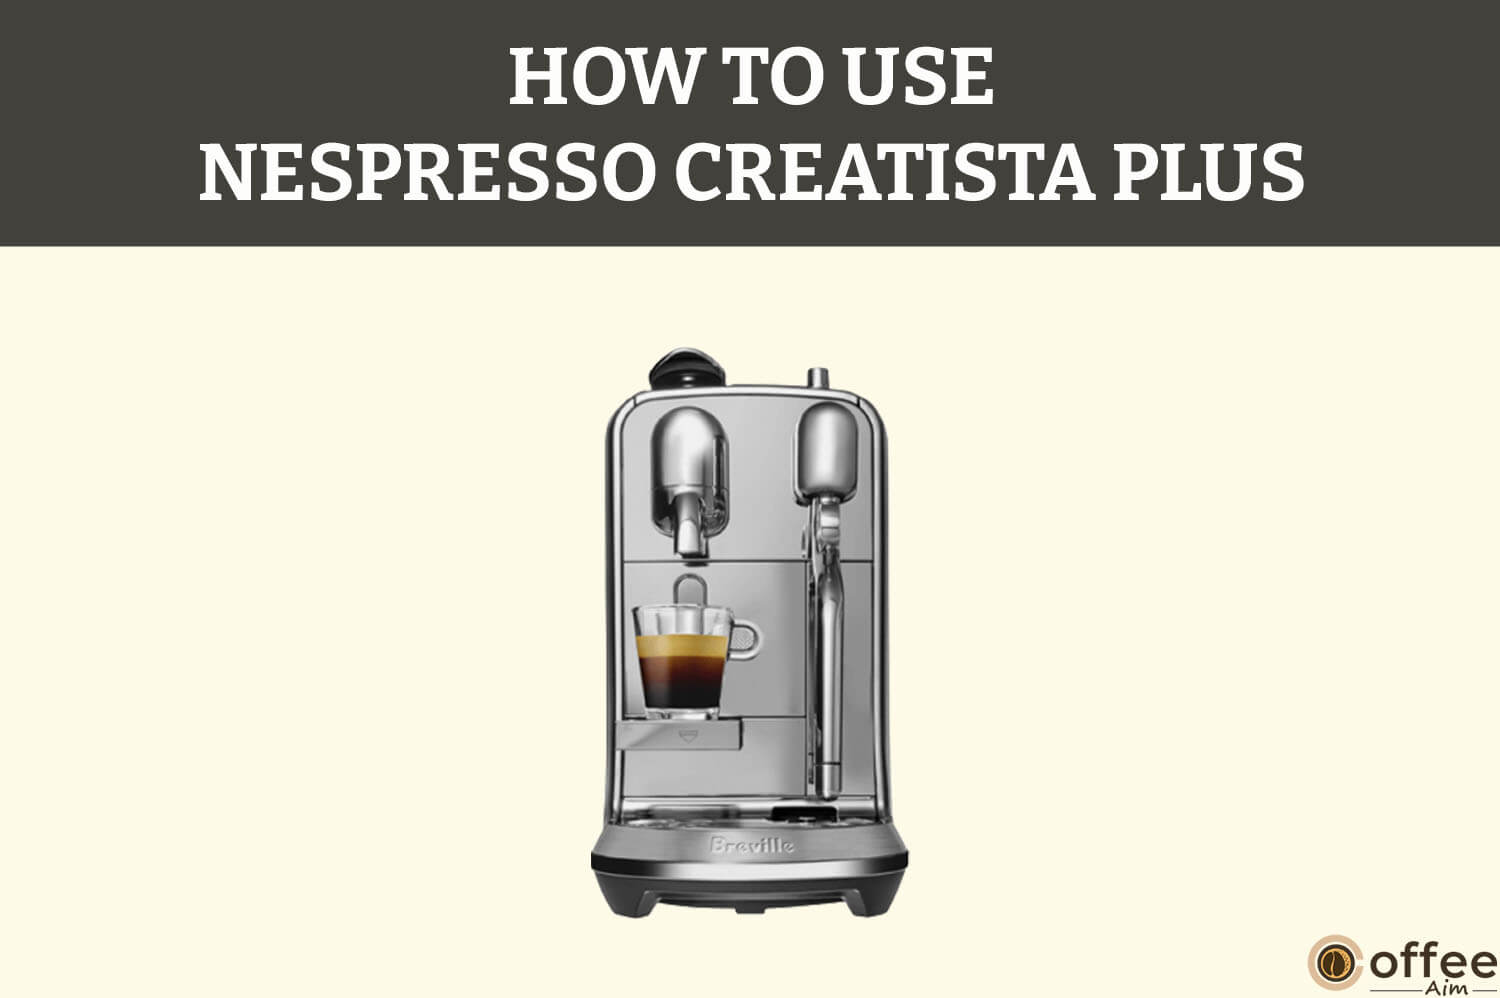 How To Nespresso Creatista Plus | A Step-By-Step Guide